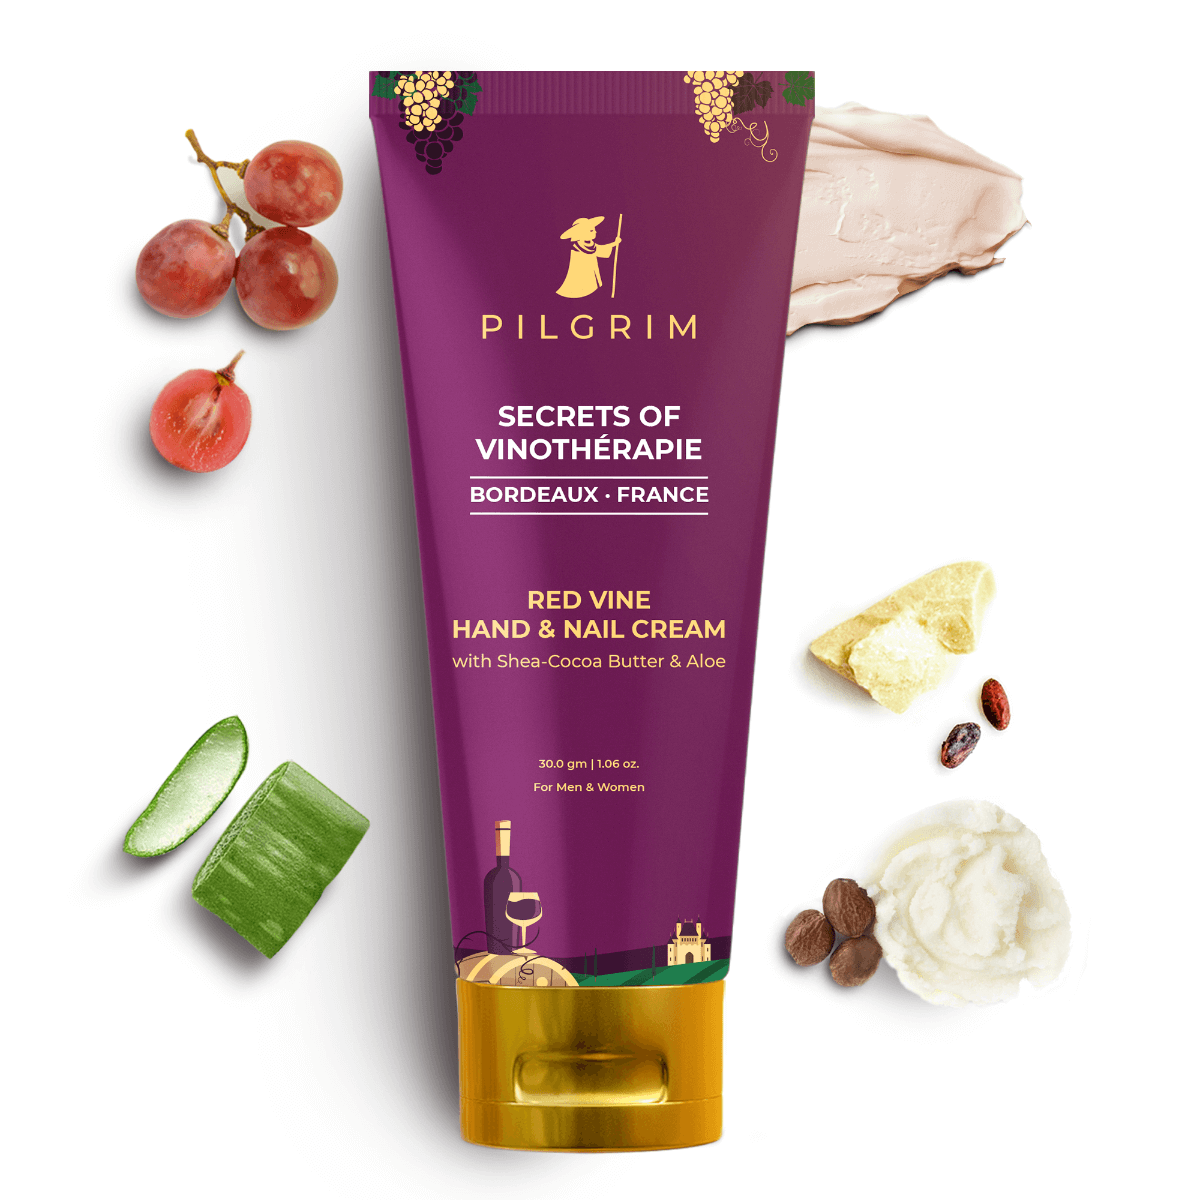 Red Vine Hand & Nail Cream with Shea-Cocoa Butter & Aloe